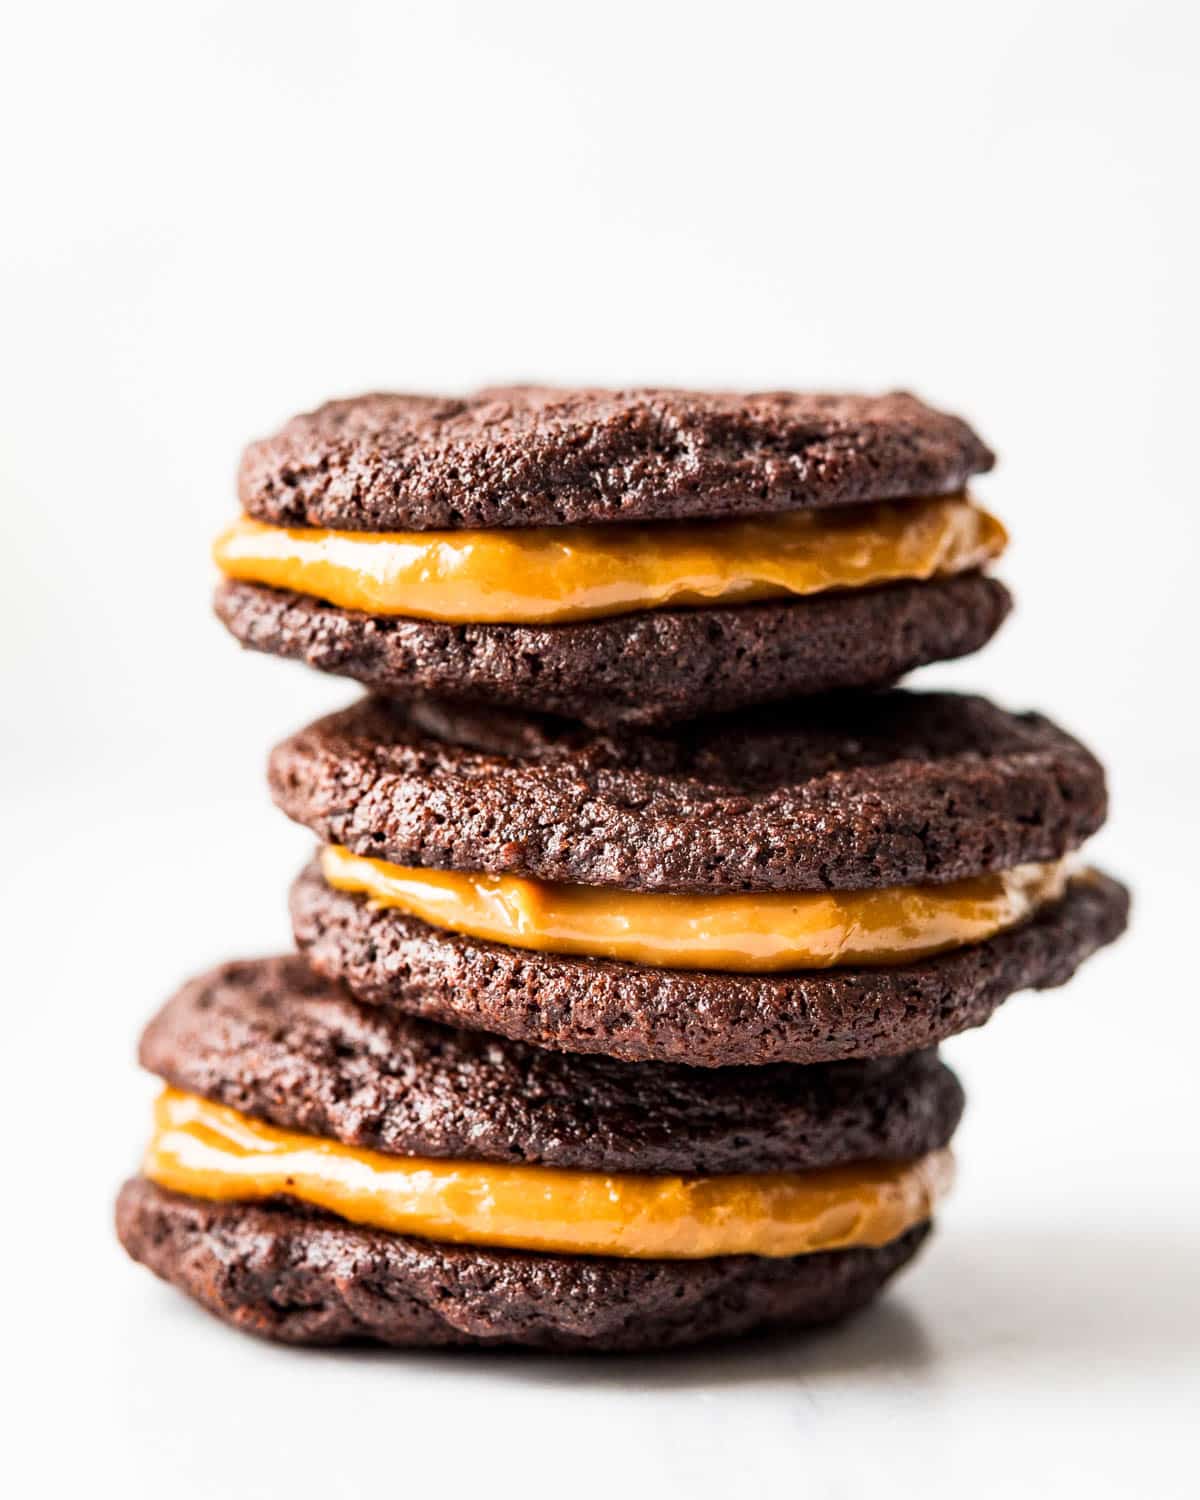 Chocolate cookies with dulce de leche sandwiched in between.